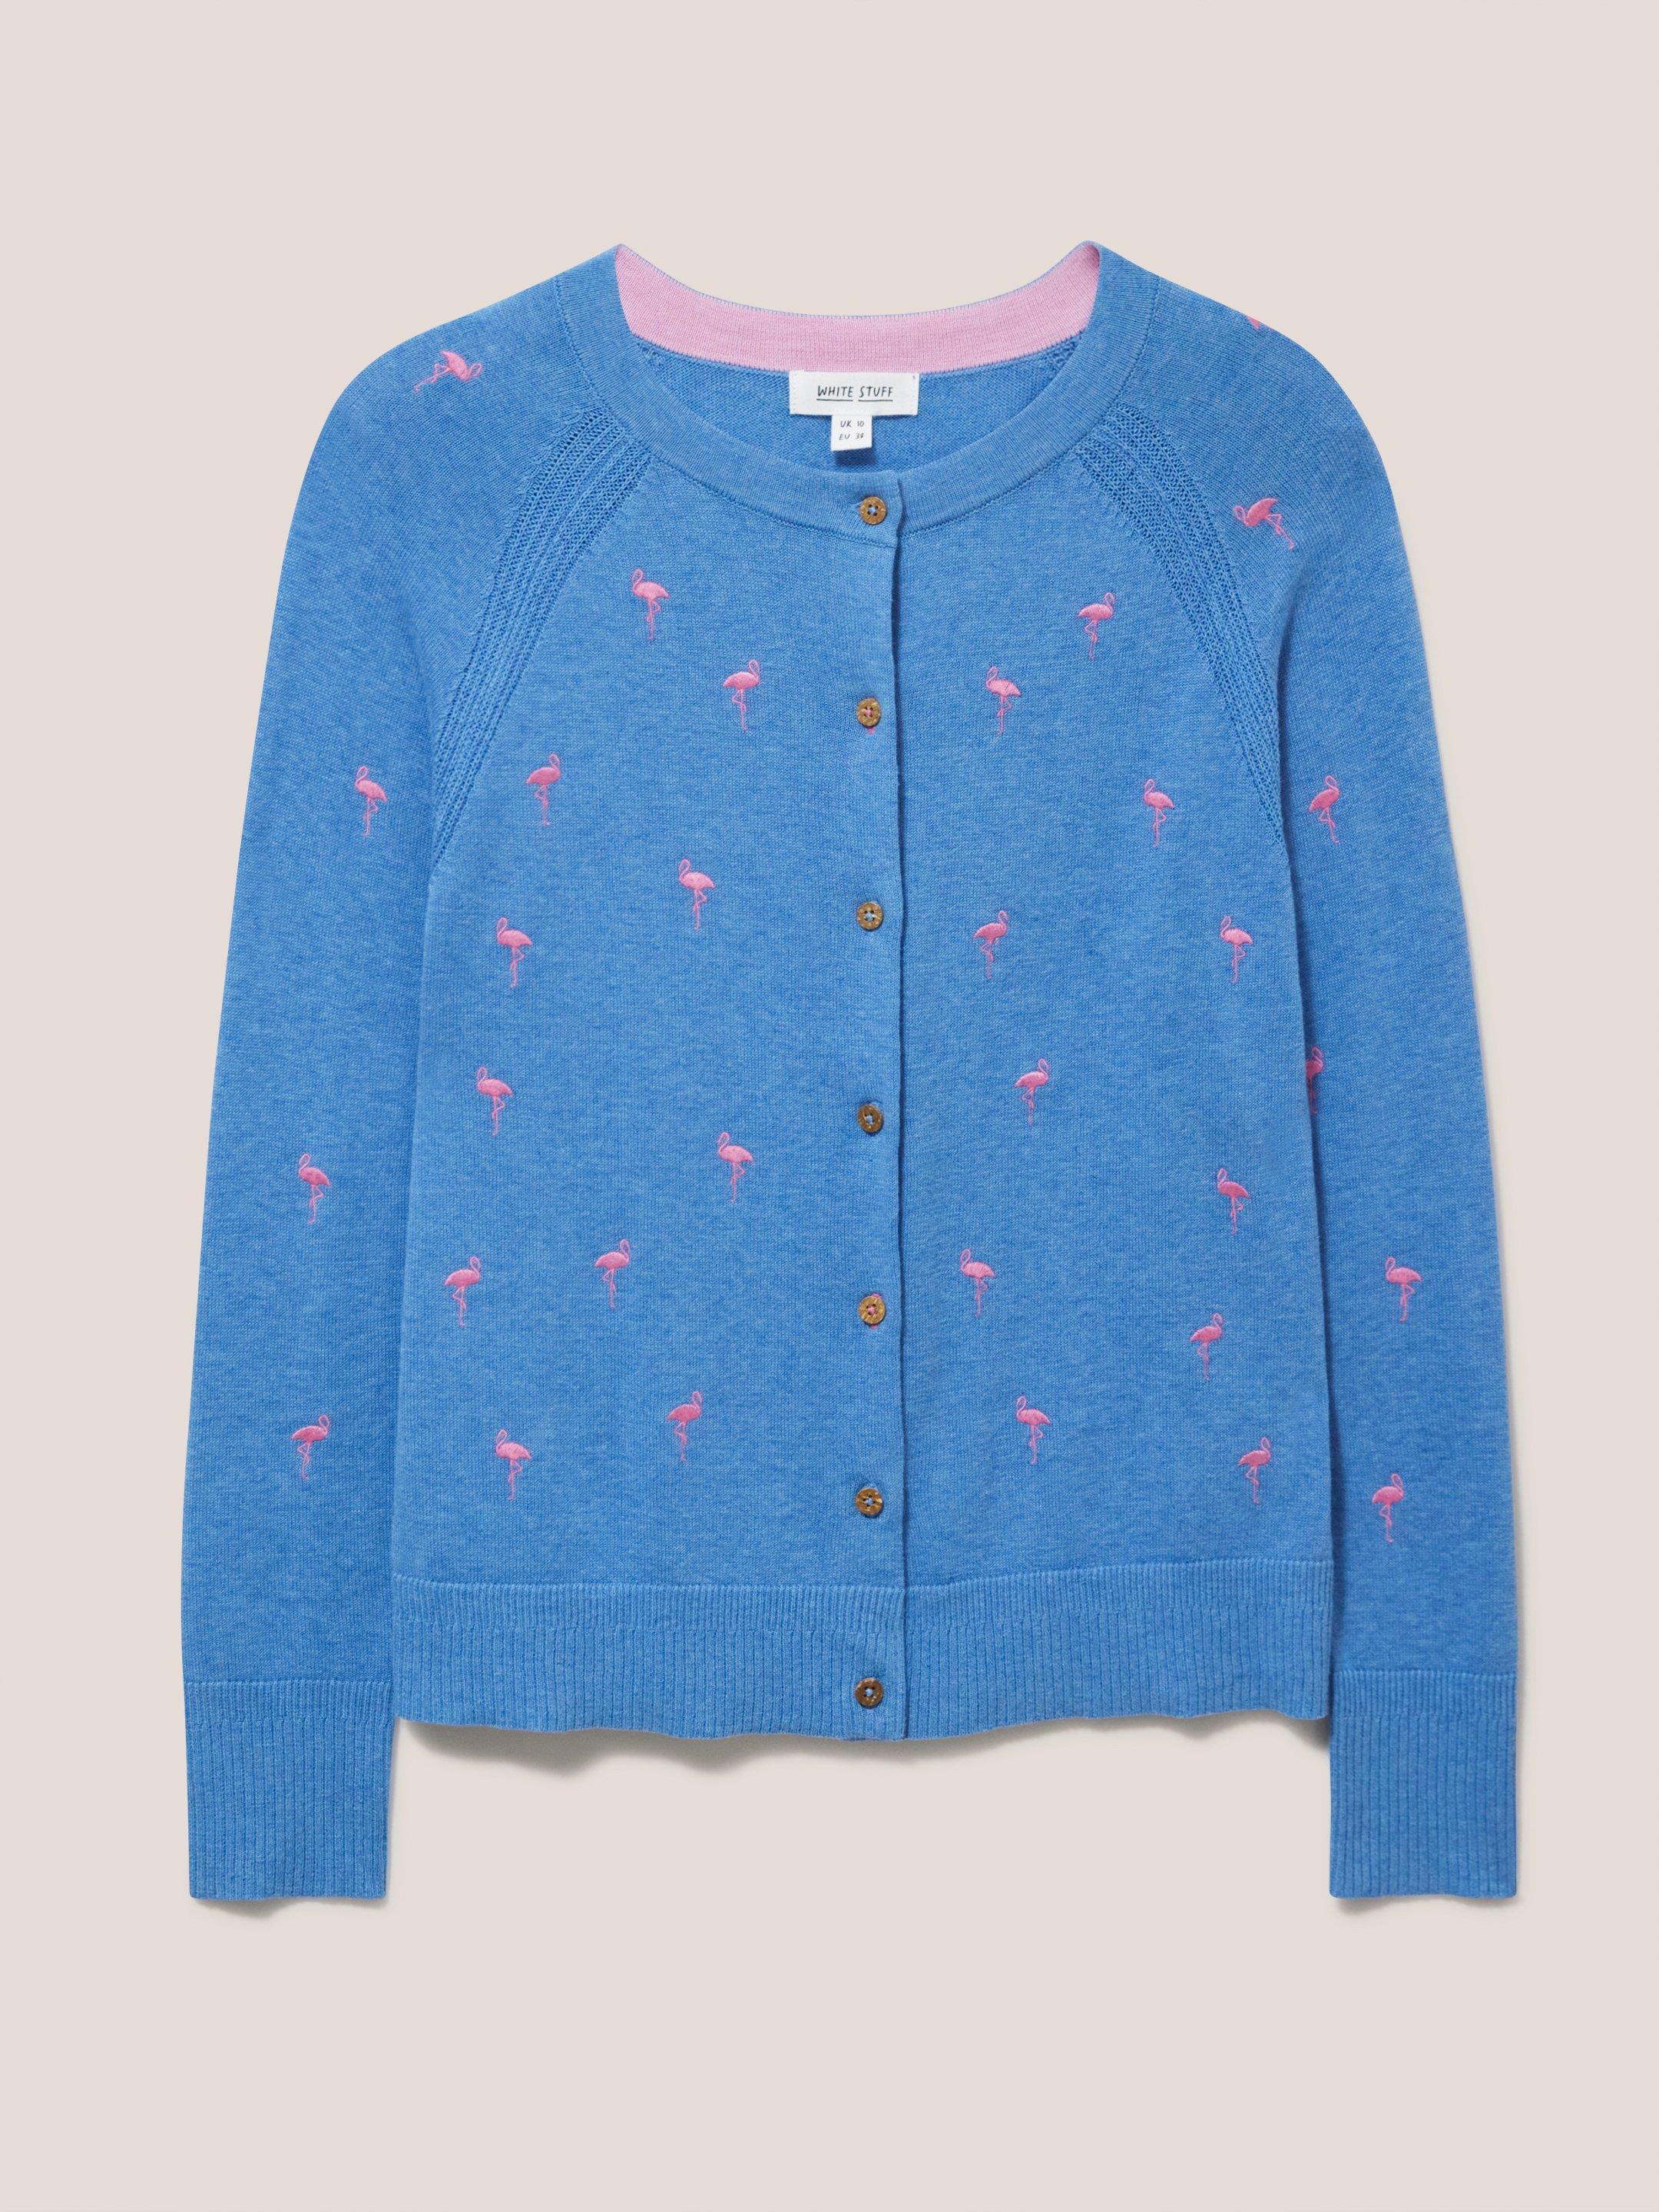 Lulu Embroidered Cardi in BLUE MLT - FLAT FRONT